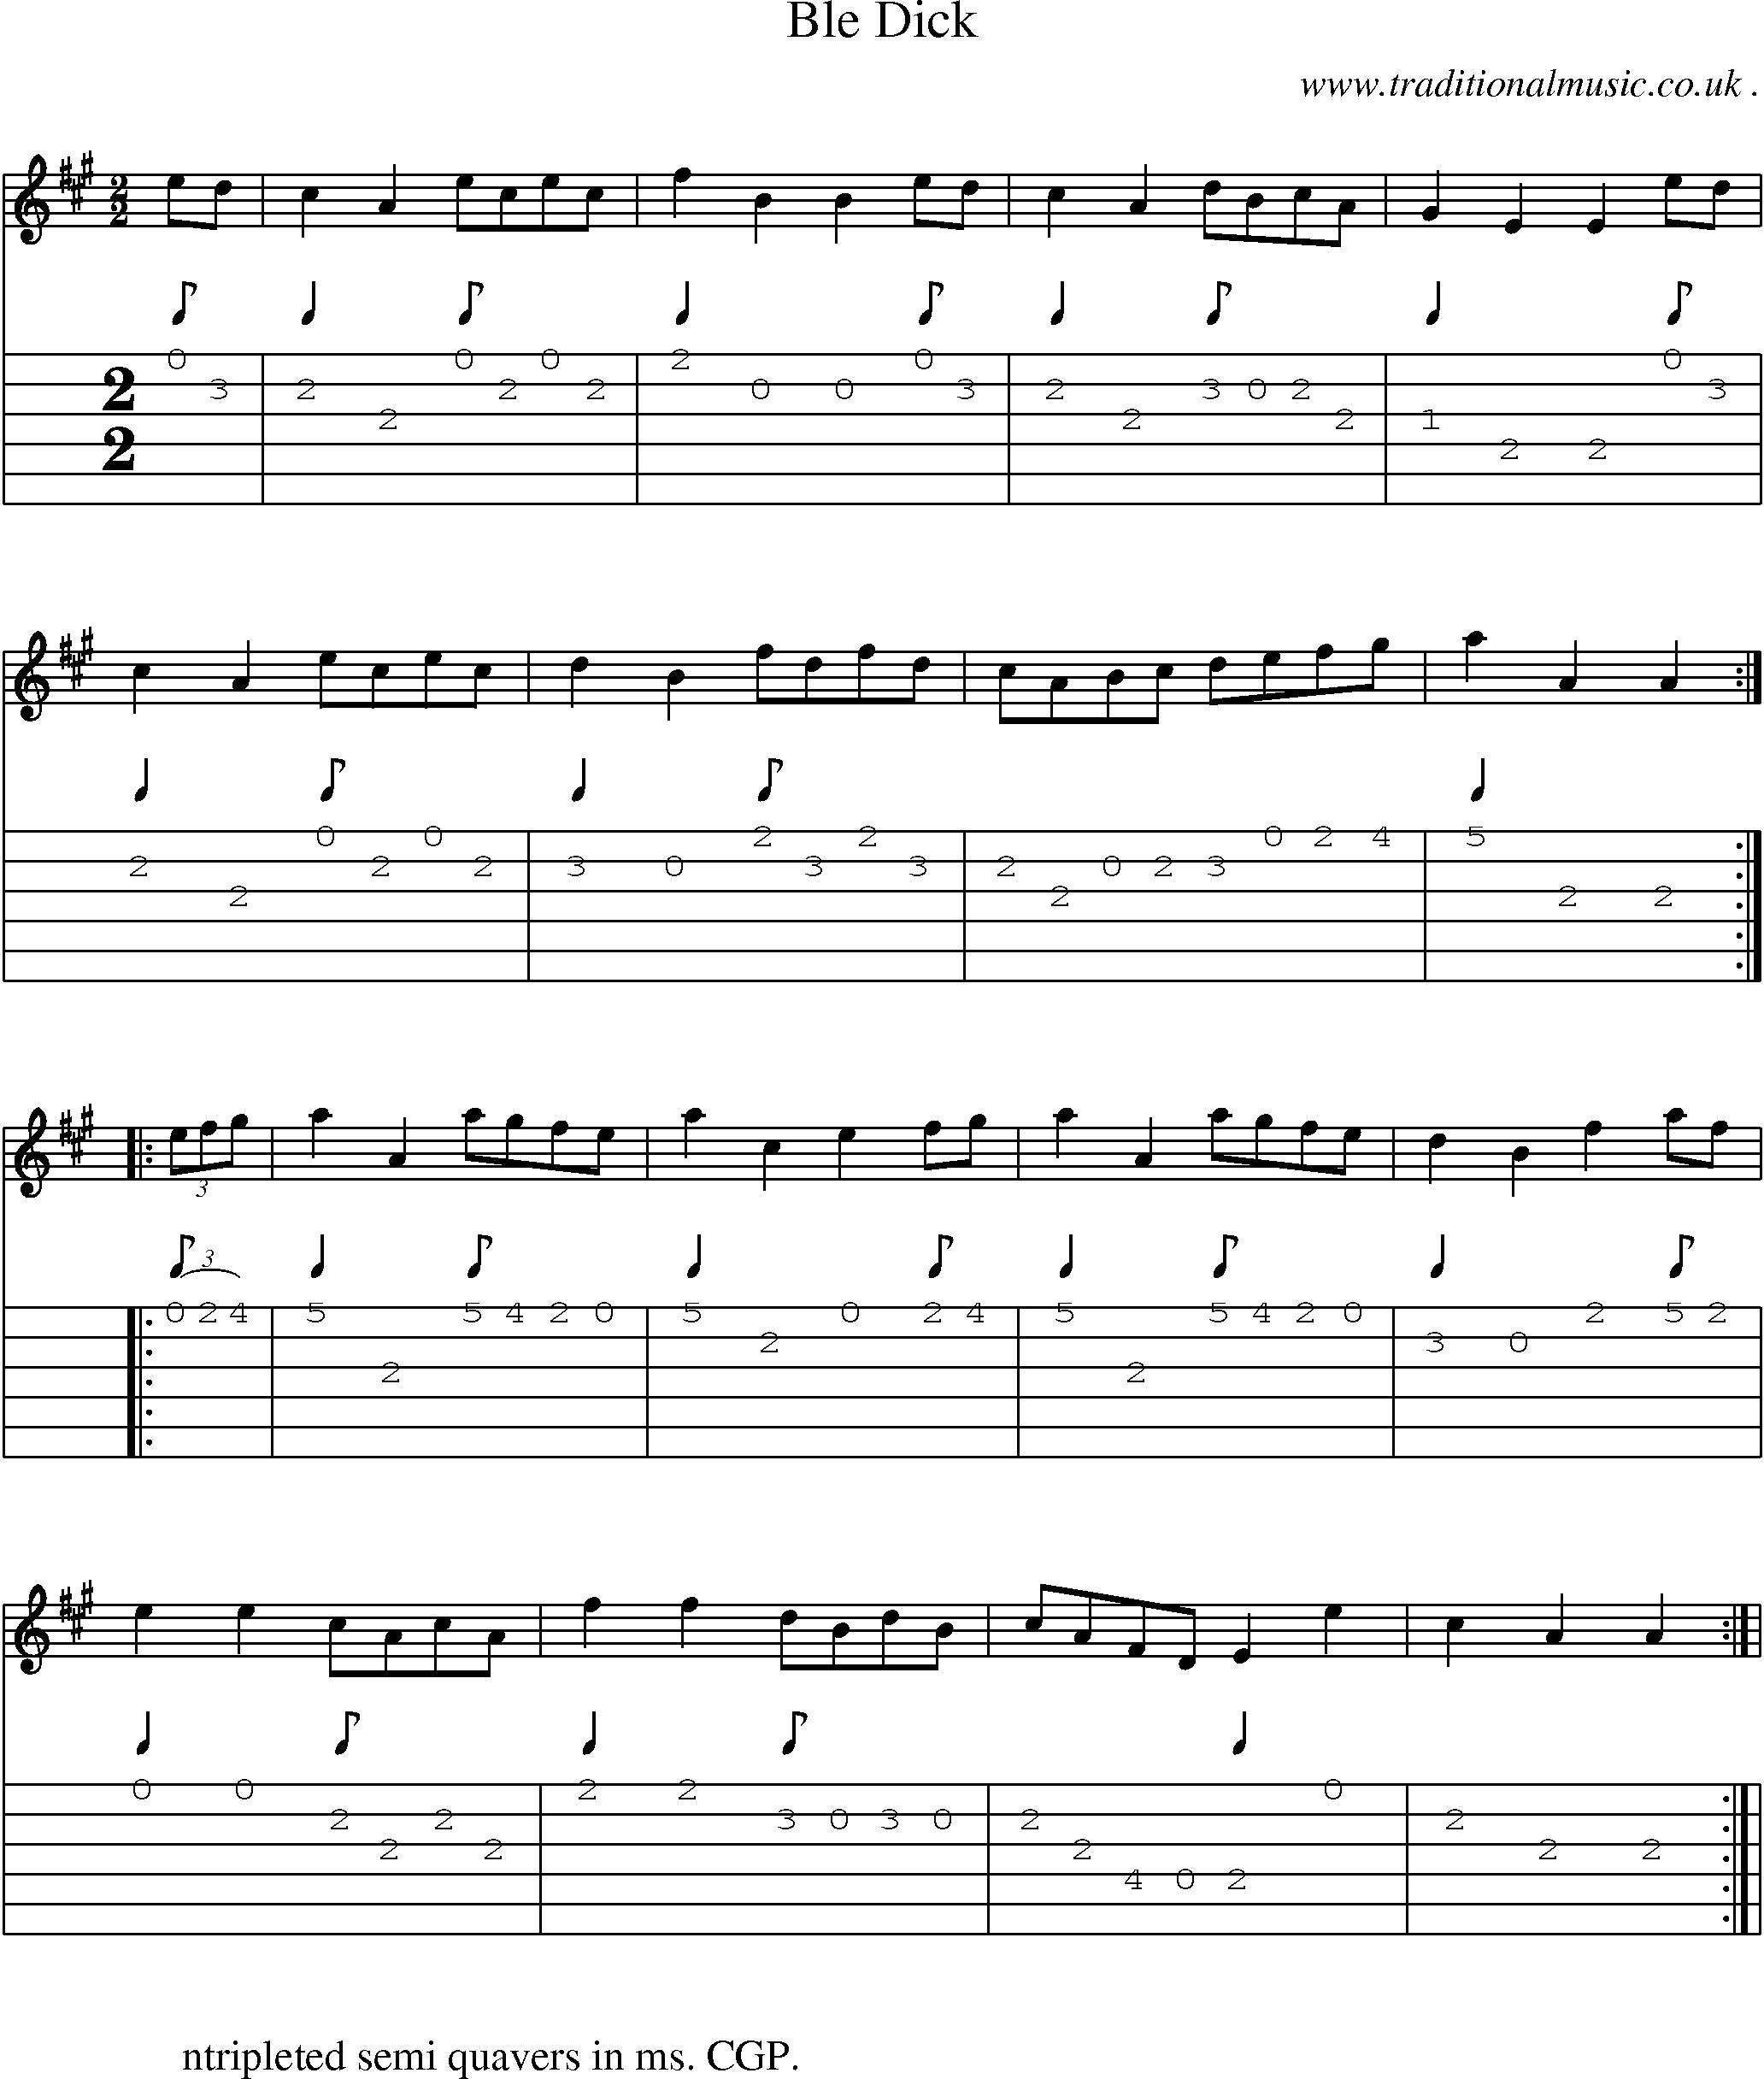 Sheet-Music and Guitar Tabs for Ble Dick